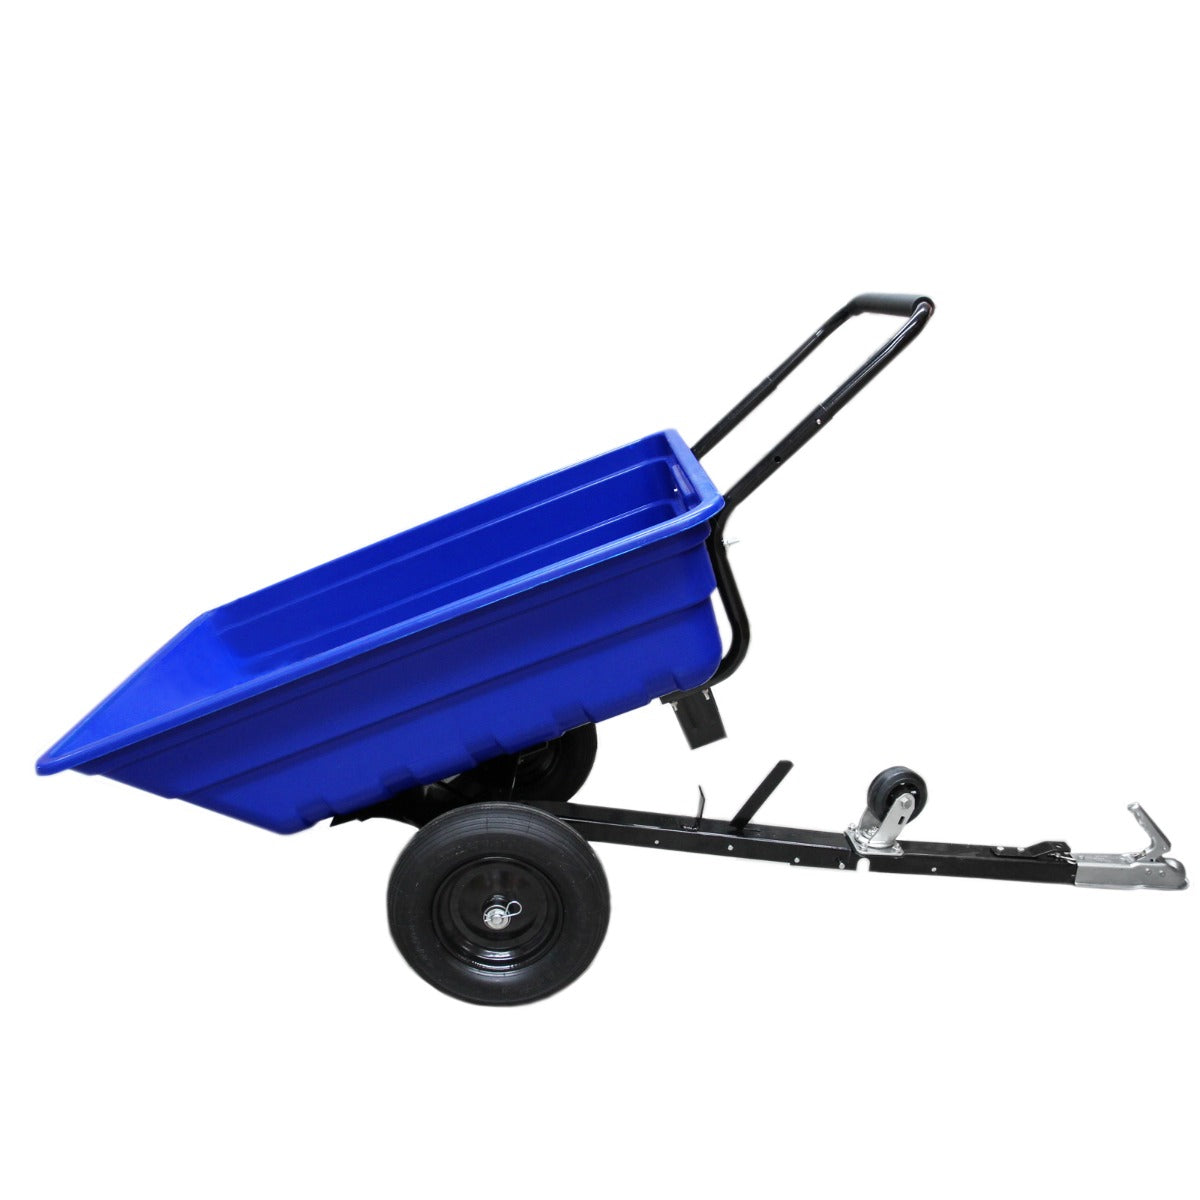 ATV Tipping Trailer & 6.5HP Wood Chipper